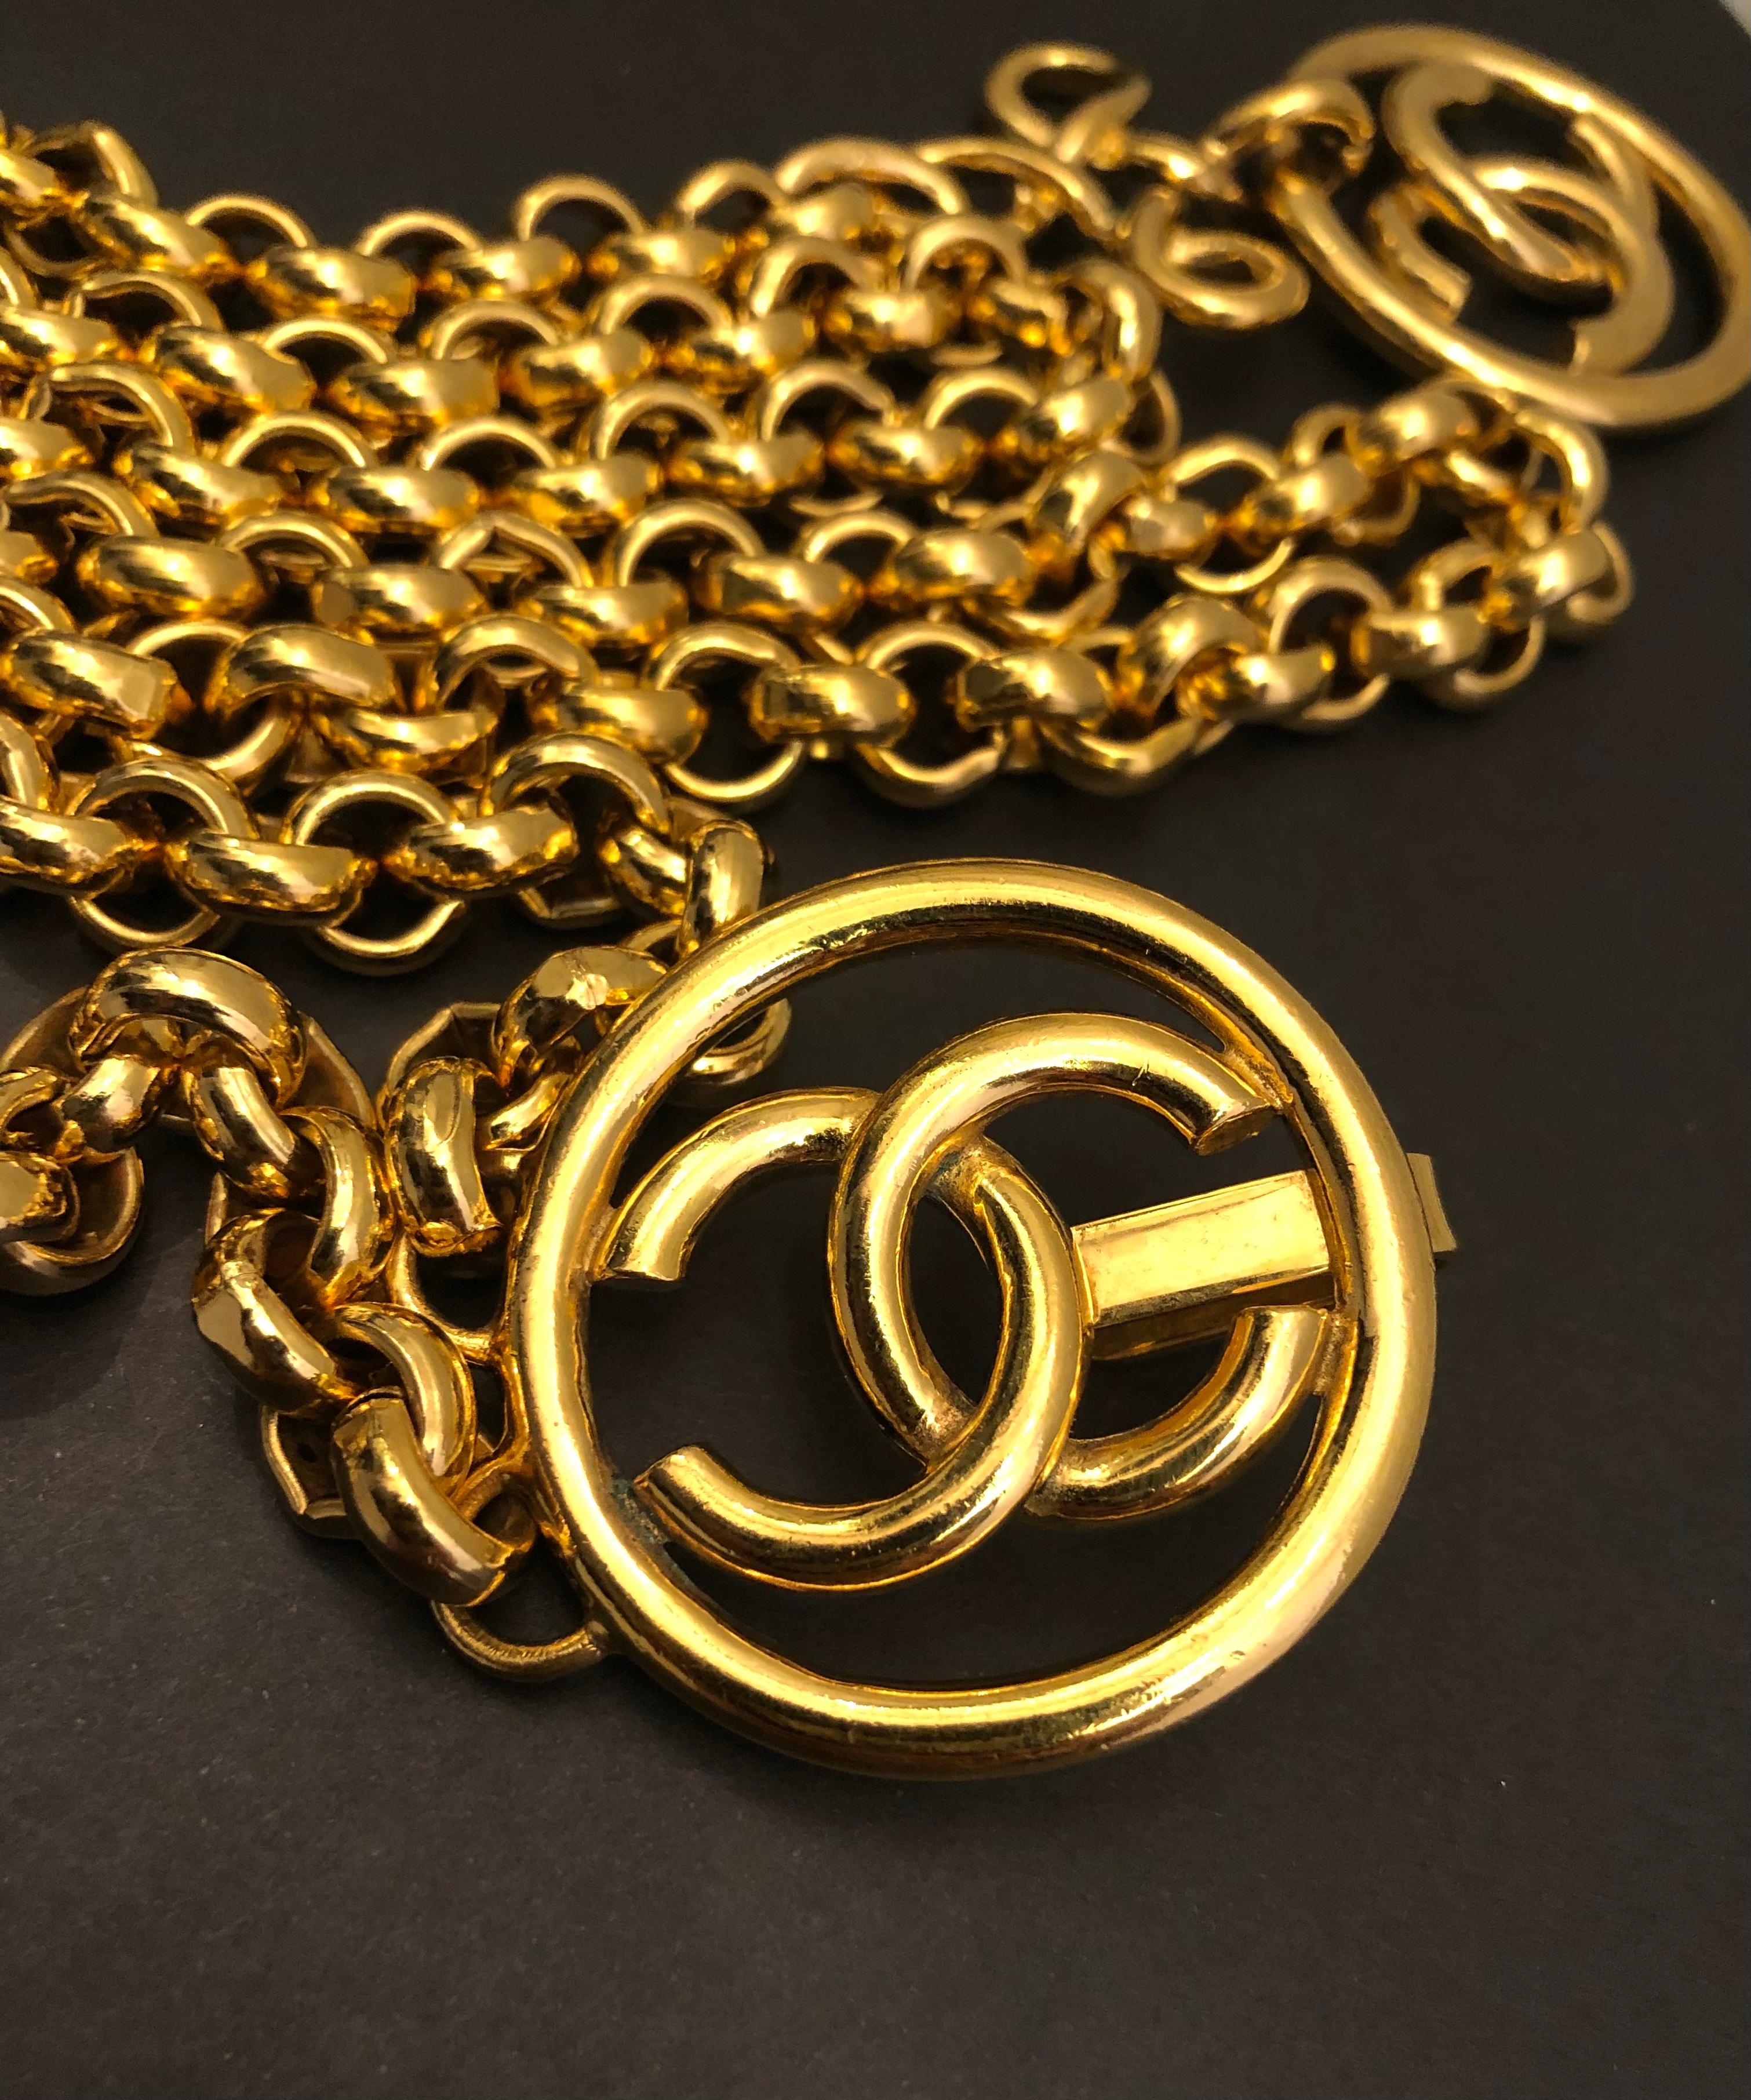 1993 Vintage CHANEL Gold Toned Clover CC Chain Belt 42 Inches Long For Sale 2